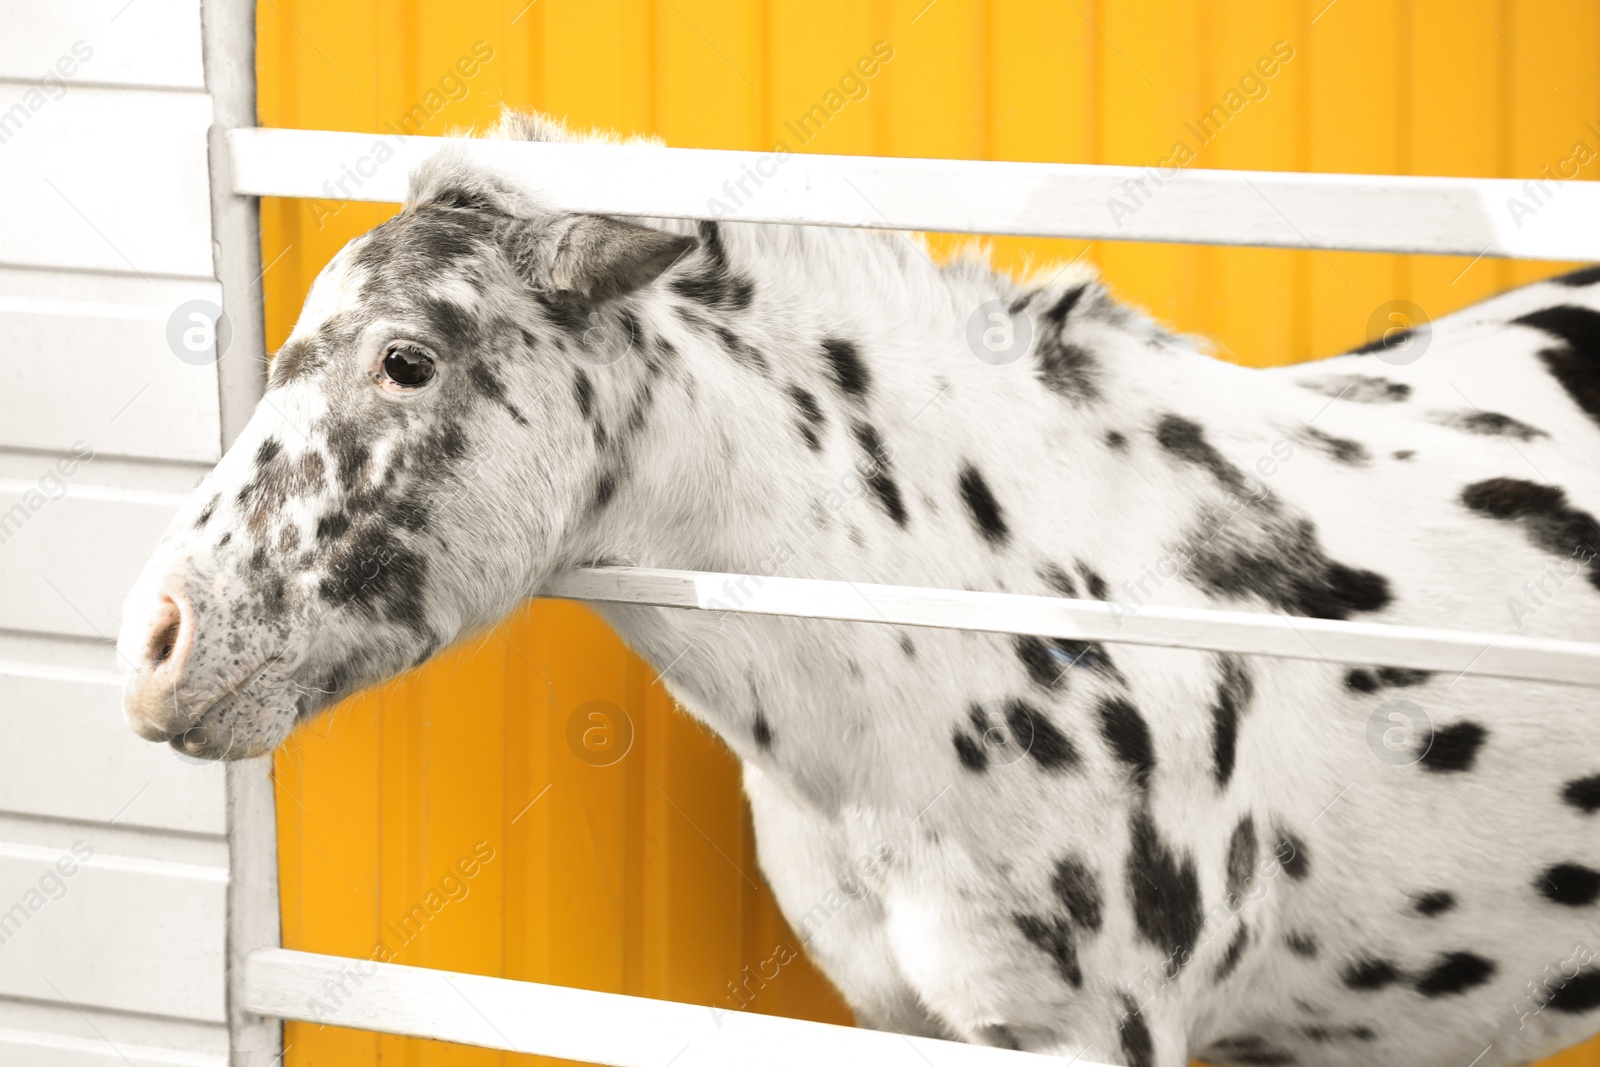 Photo of Miniature horse with appaloosa patterns near white fence